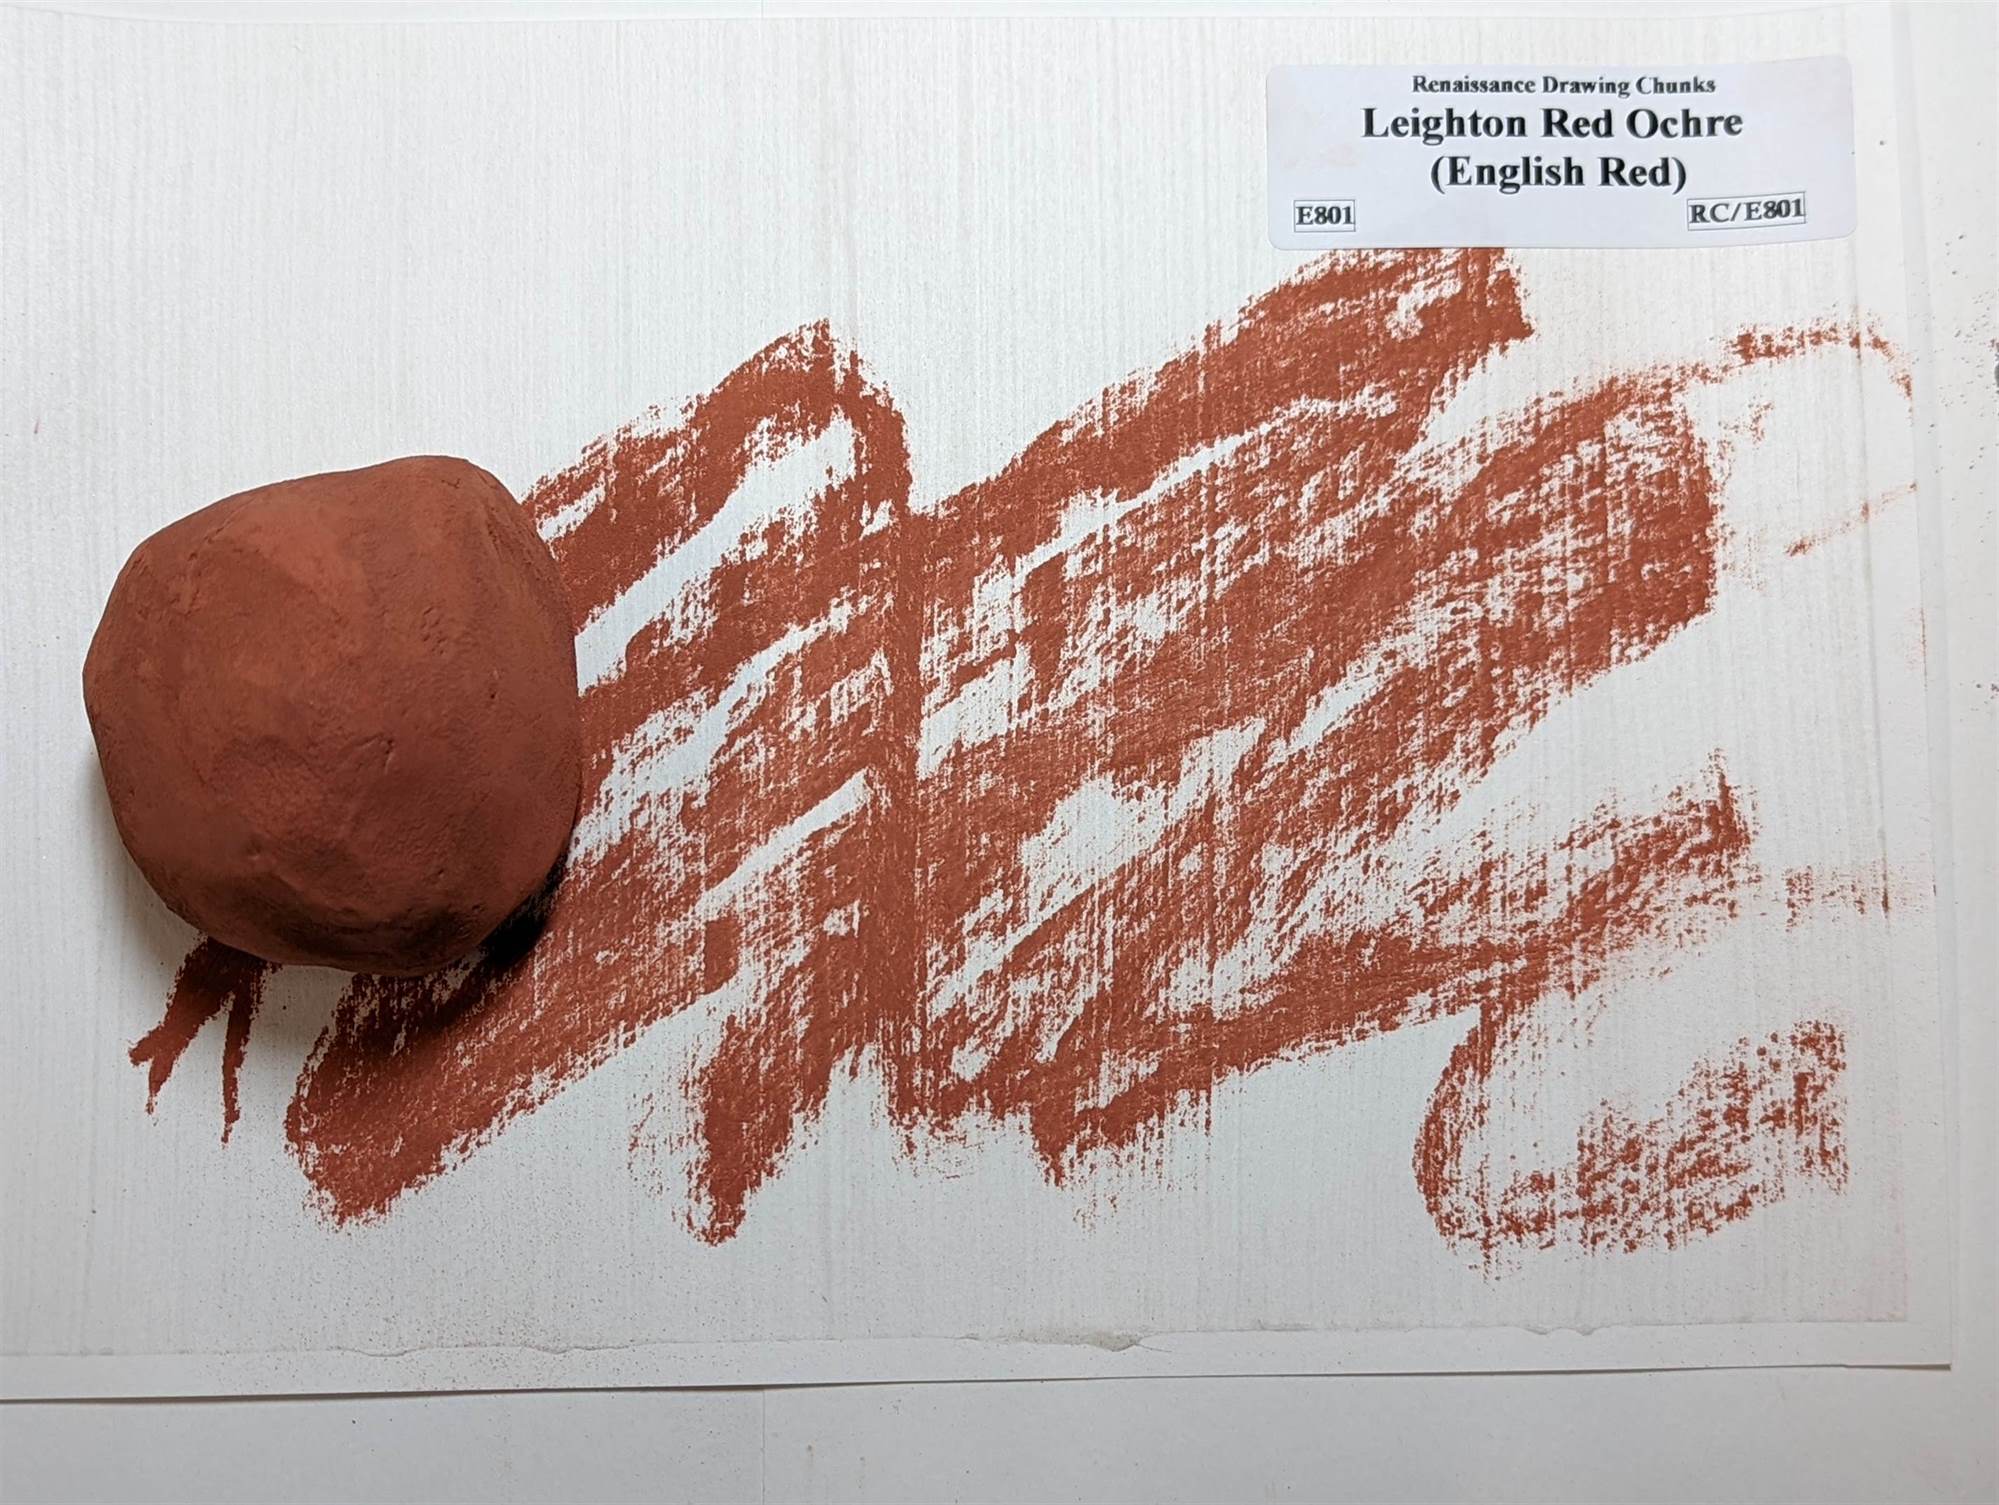 Wallace Seymour Renaissance Drawing Chunks - Leighton Red Ochre (English Red)